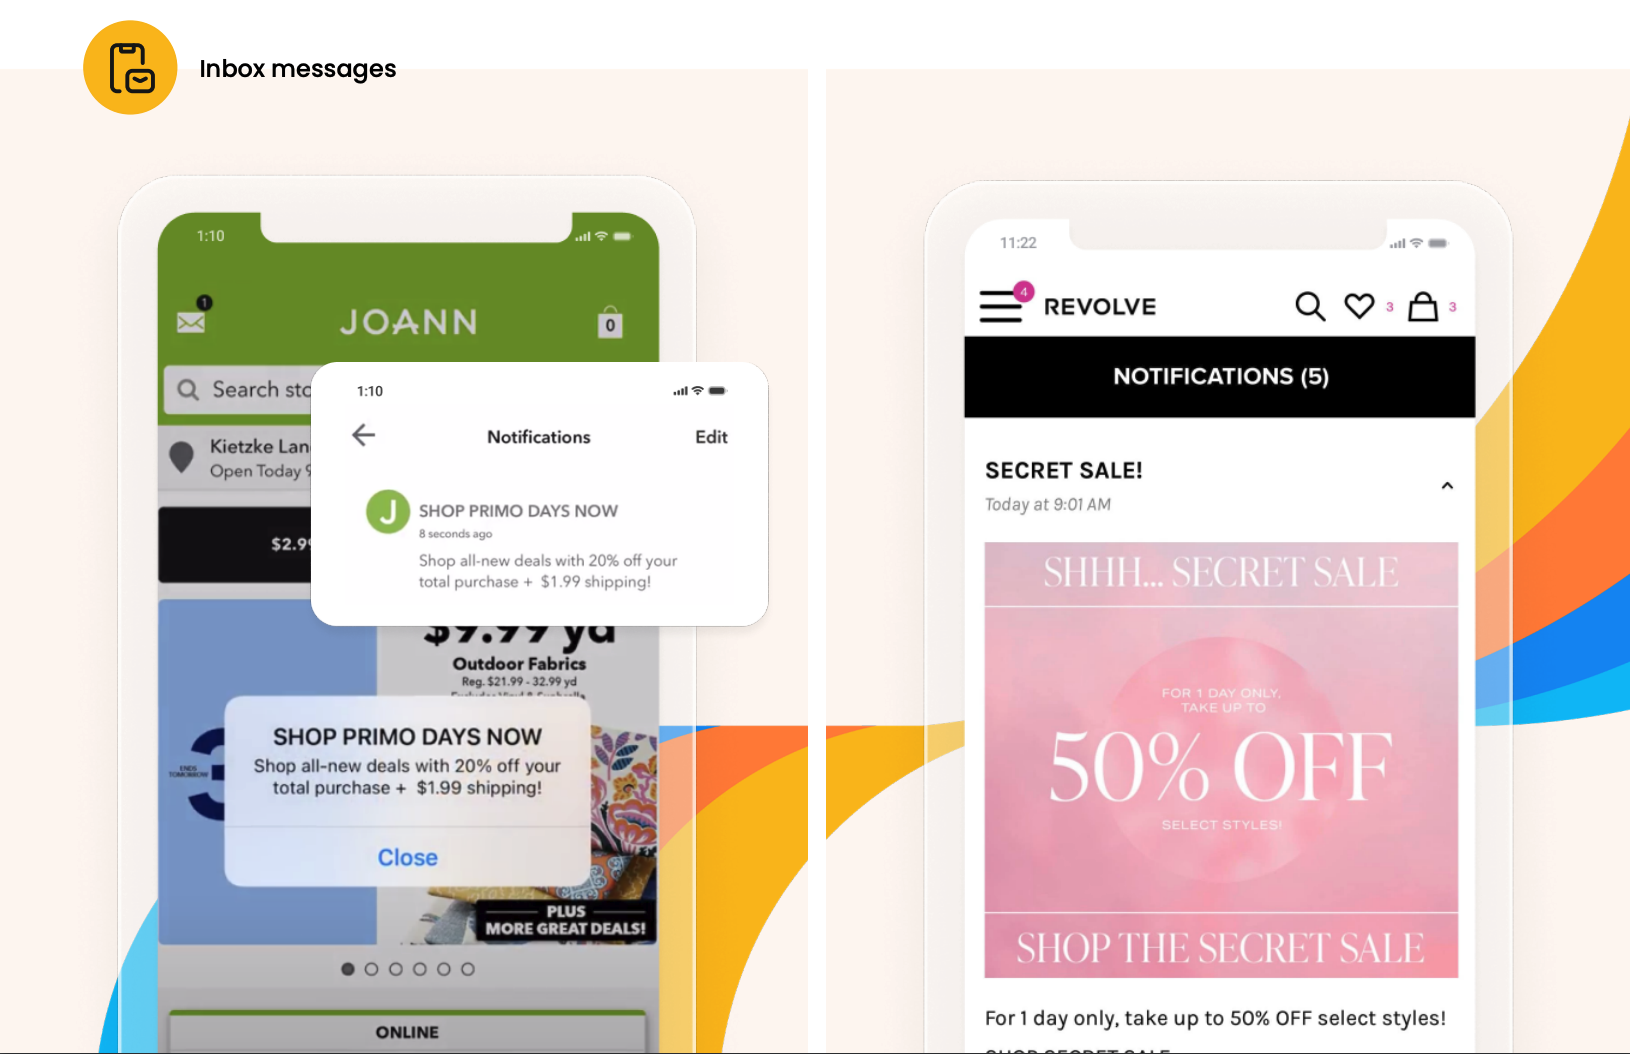 Mobile inbox messaging examples: JOANN and Revolve